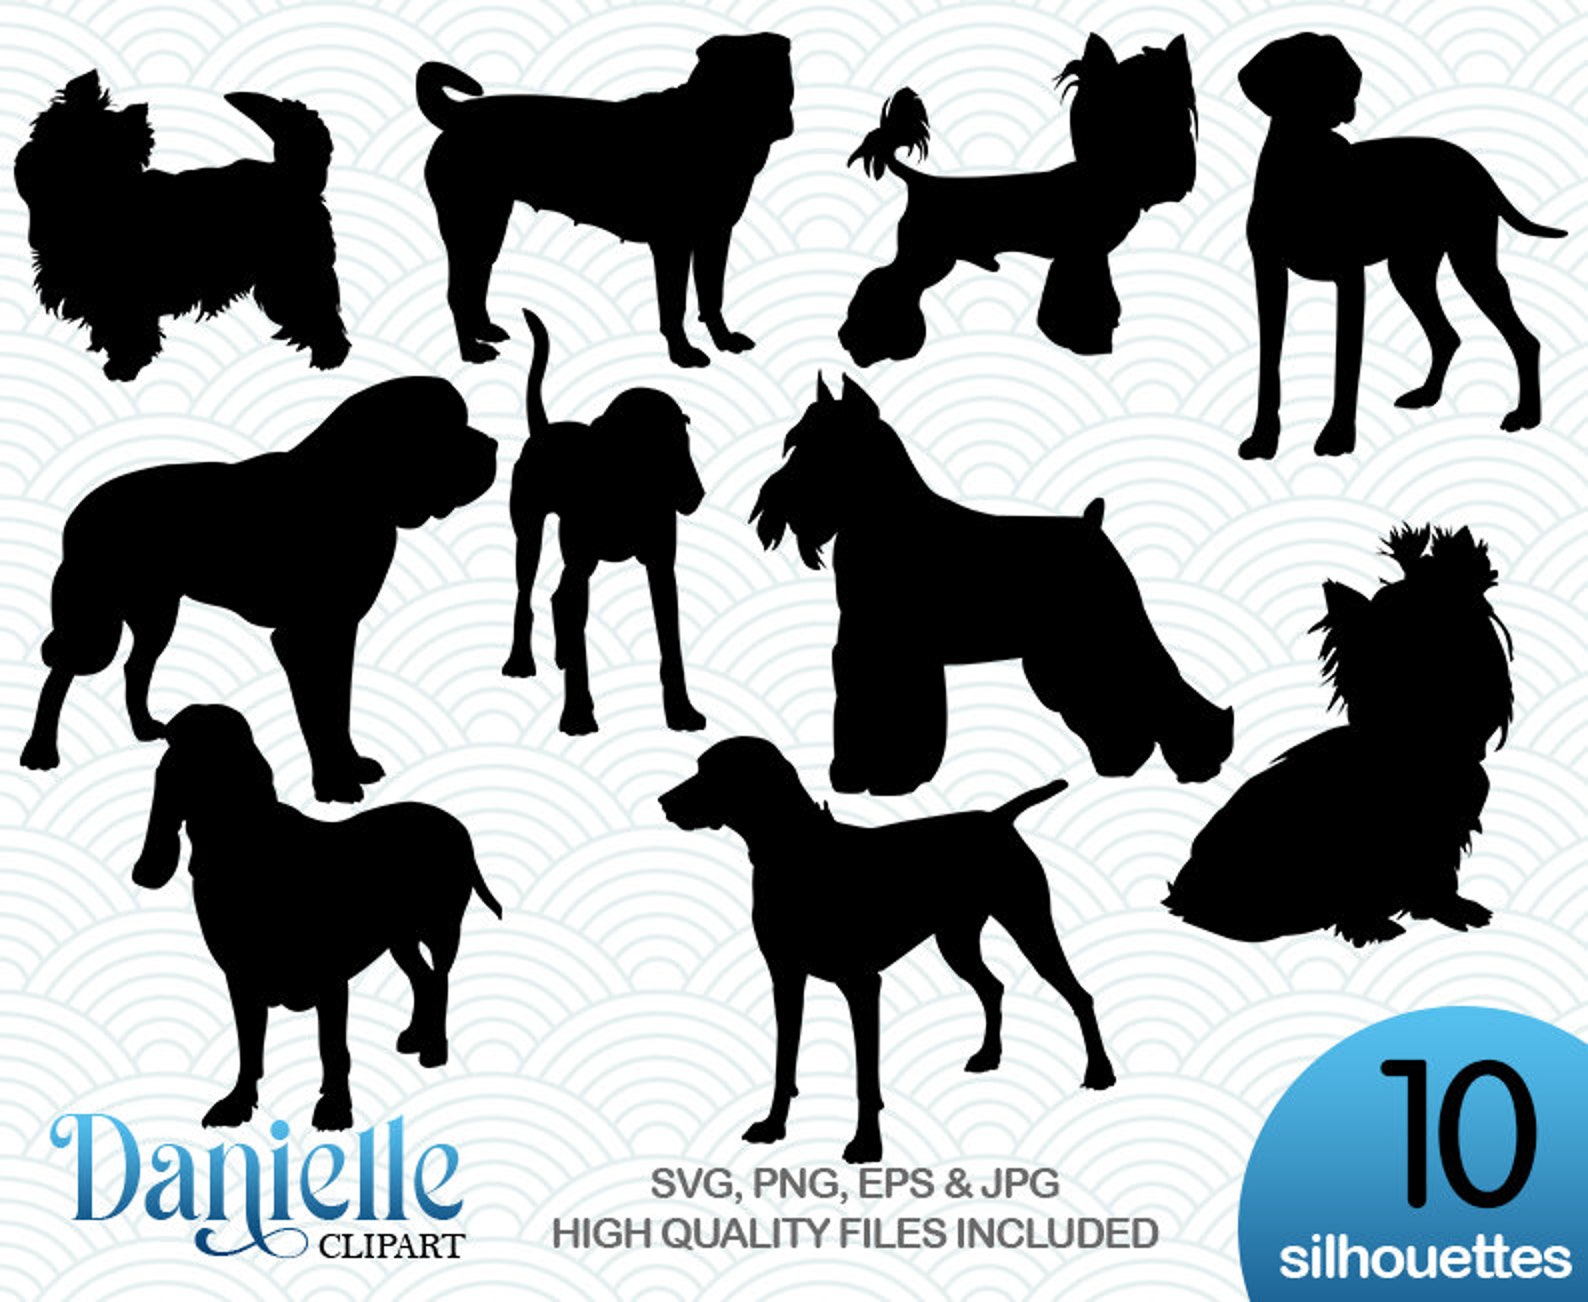 Dogs Silhouettes SVG Png Eps Jpg Cricut Silhouette - Etsy